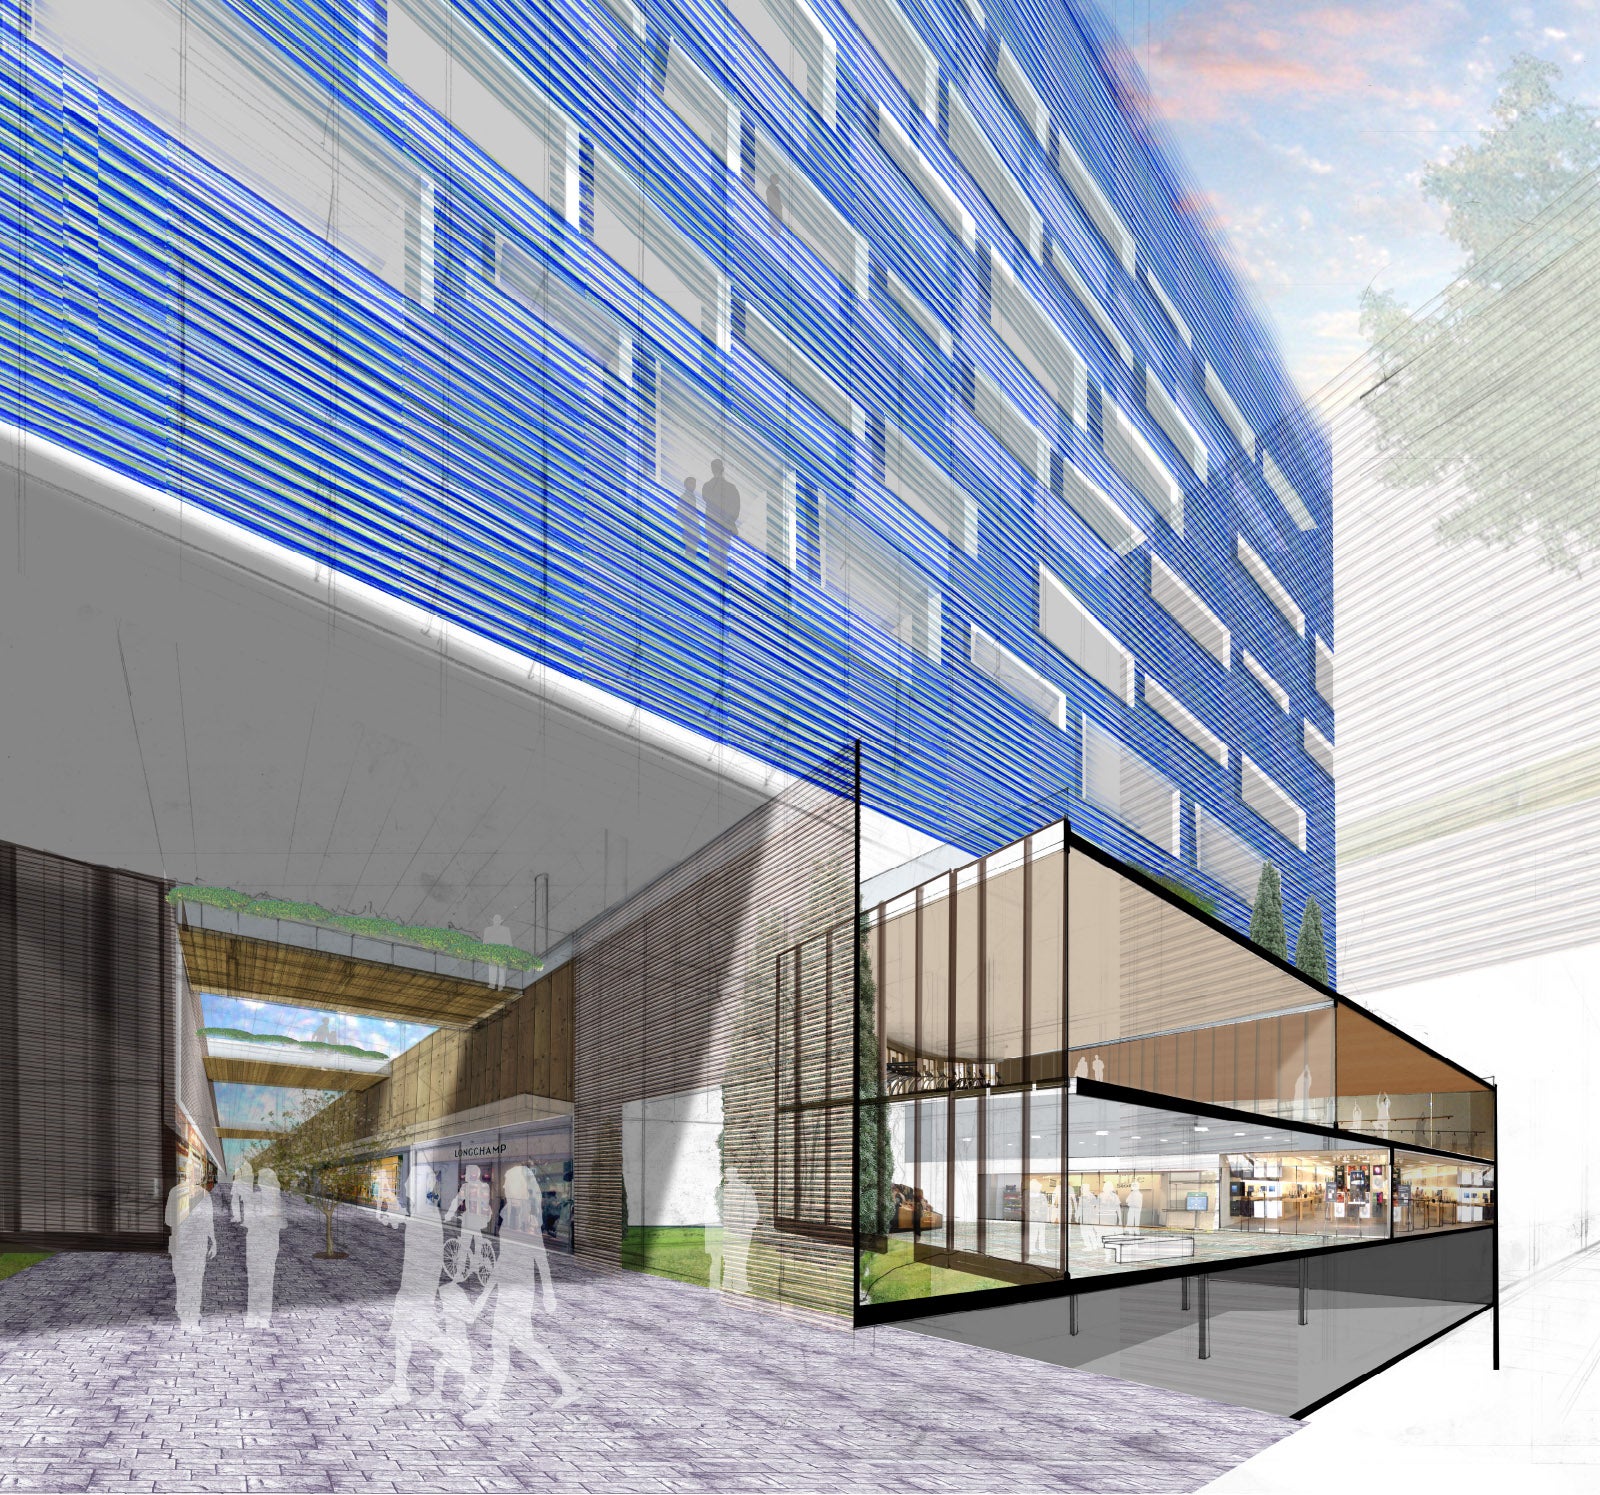 An exterior rendering of her building design. The view is from the front extrance, looking up at the façade.